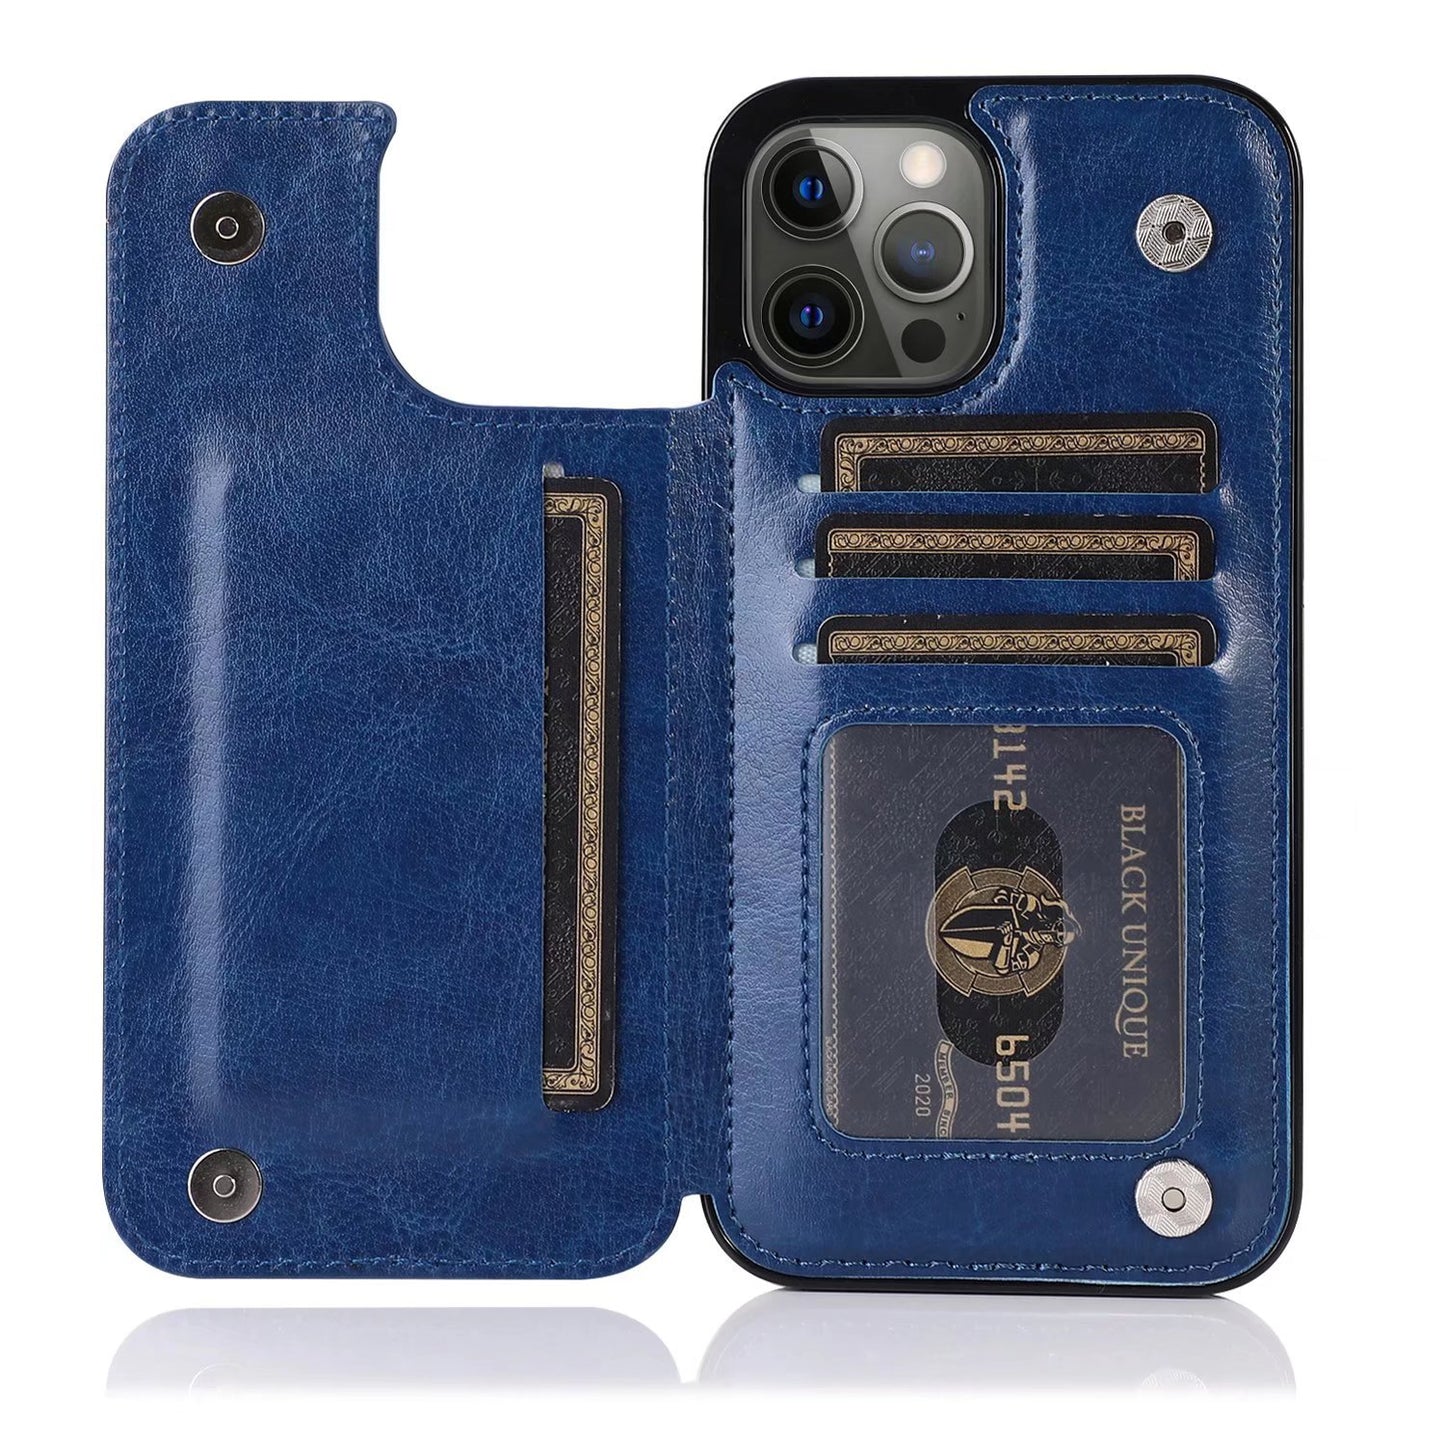 Premium TPU Leather iPhone Case with Hidden Wallet